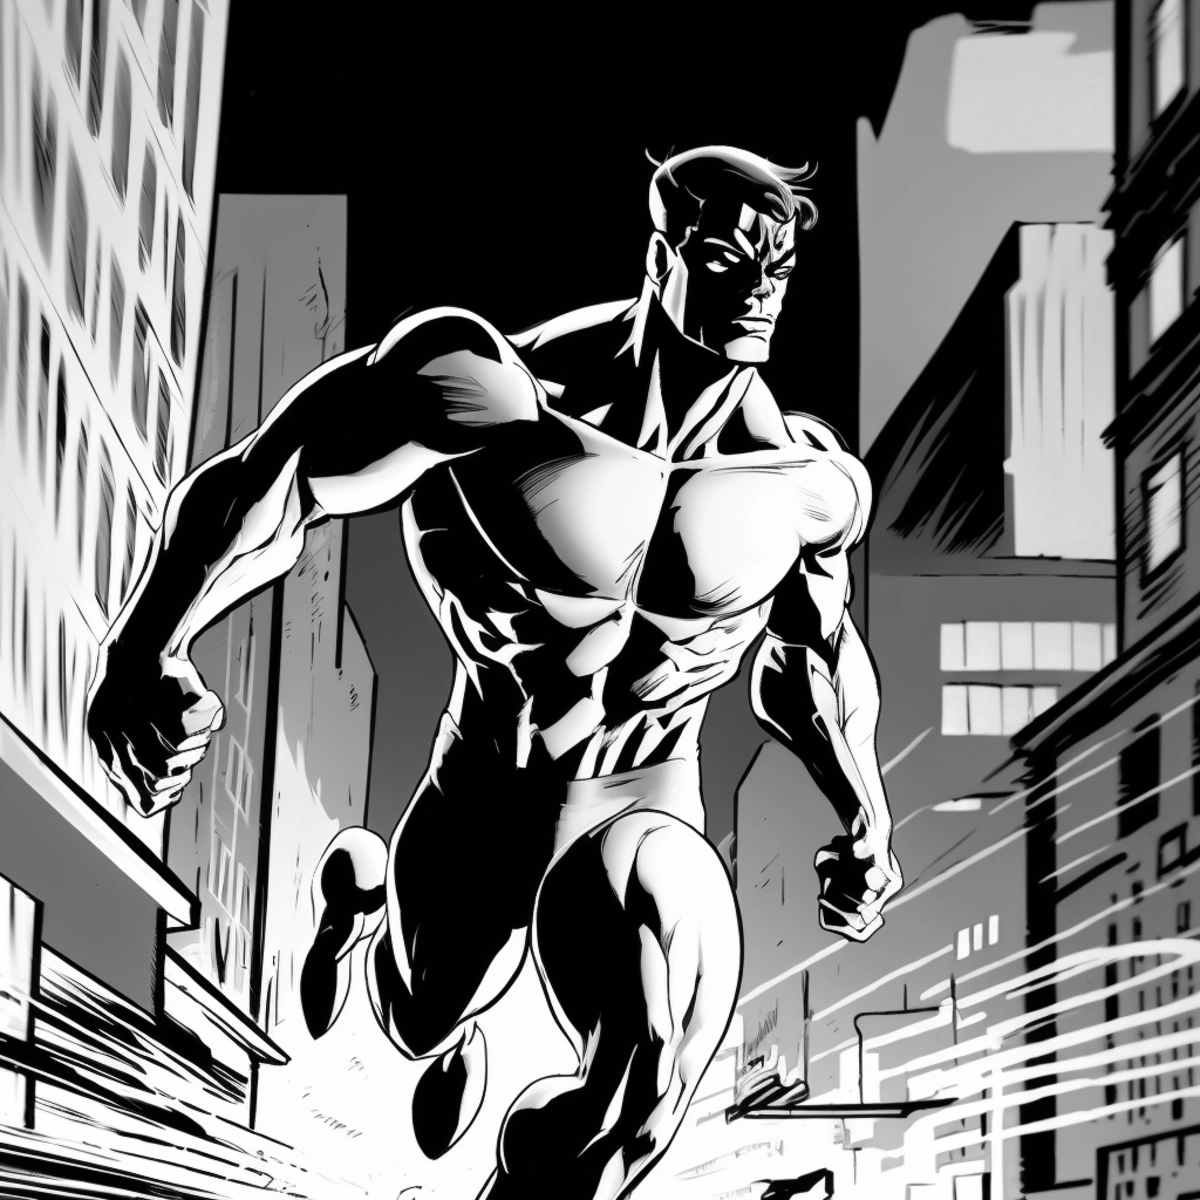 A dynamic comic book-style illustration of a superhero leaping into action, with a cityscape in the background